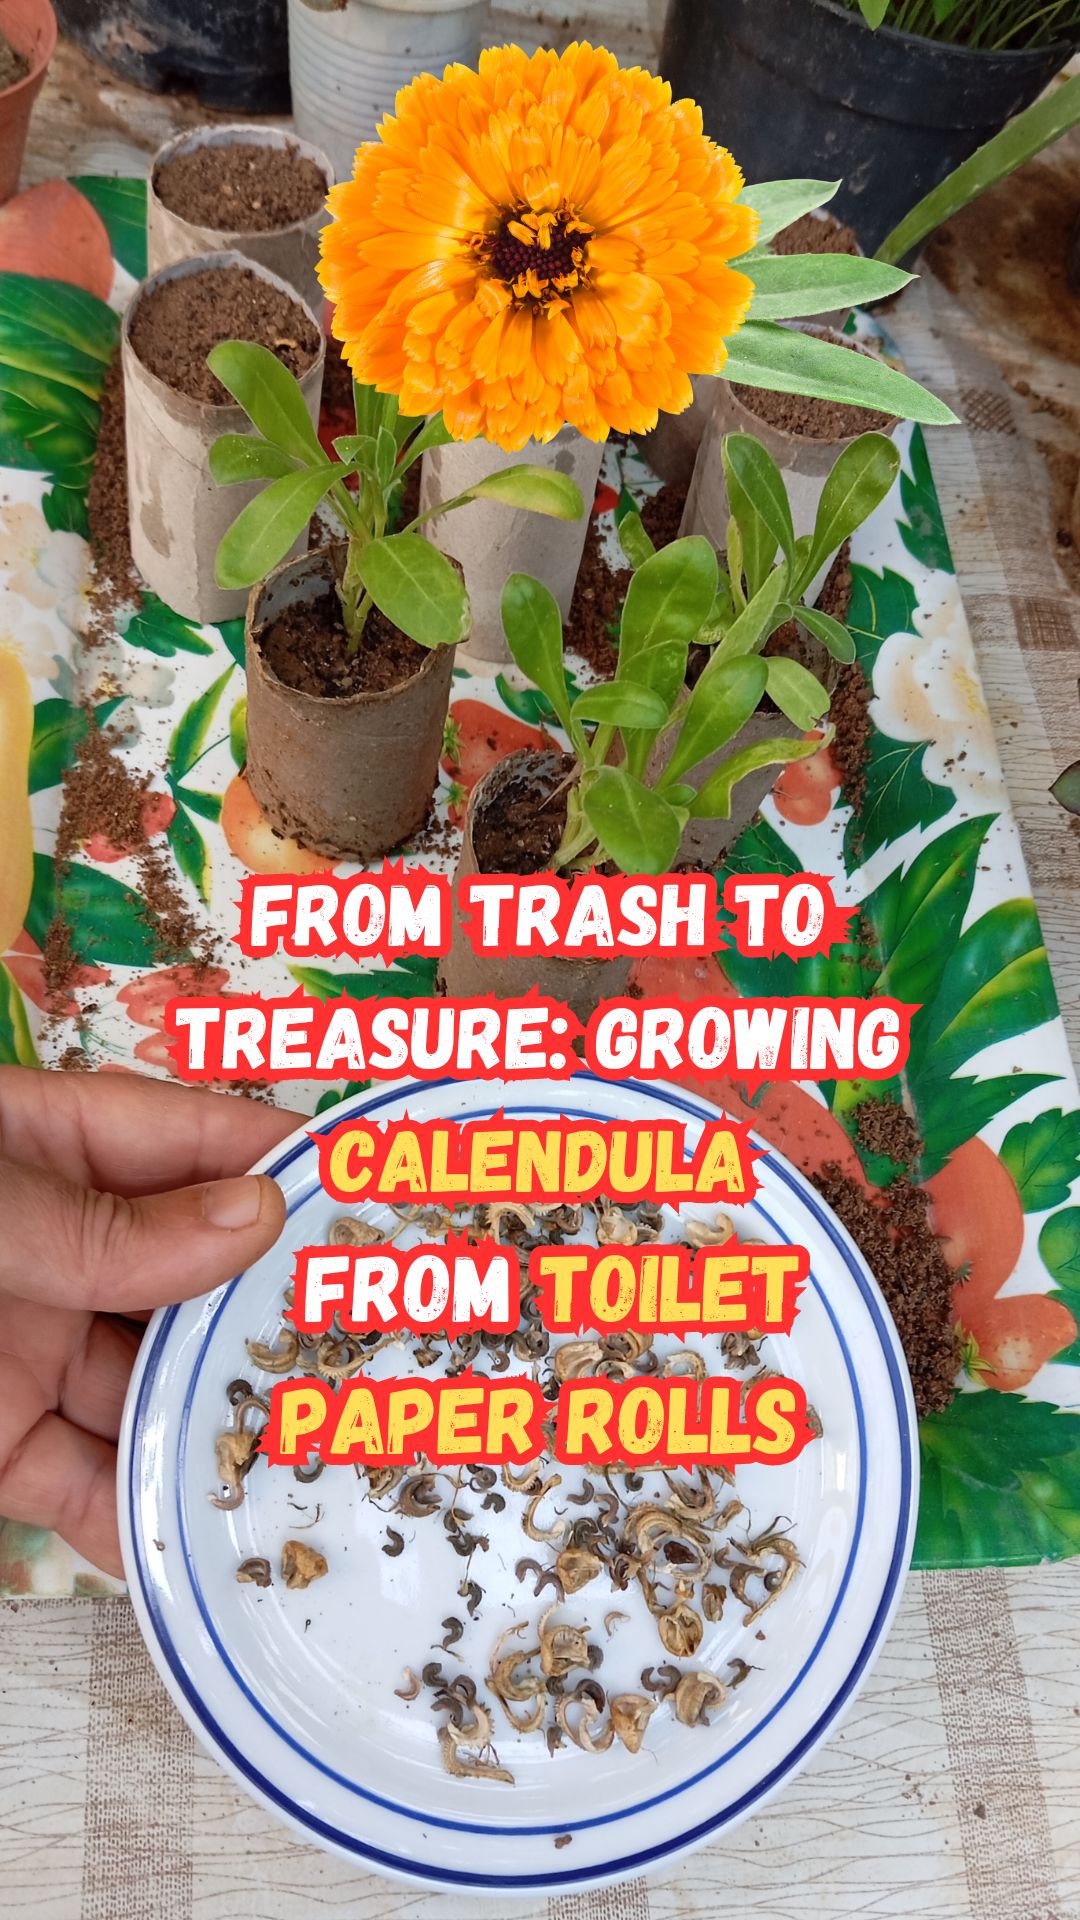 Discover the art of seed propagation and learn how to repurpose everyday household items like toilet paper rolls to create an eco-friendly seed starting system. You'll learn the step-by-step instructions for filling the toilet paper rolls with the right soil mix, and planting your Calendula seeds with precision.